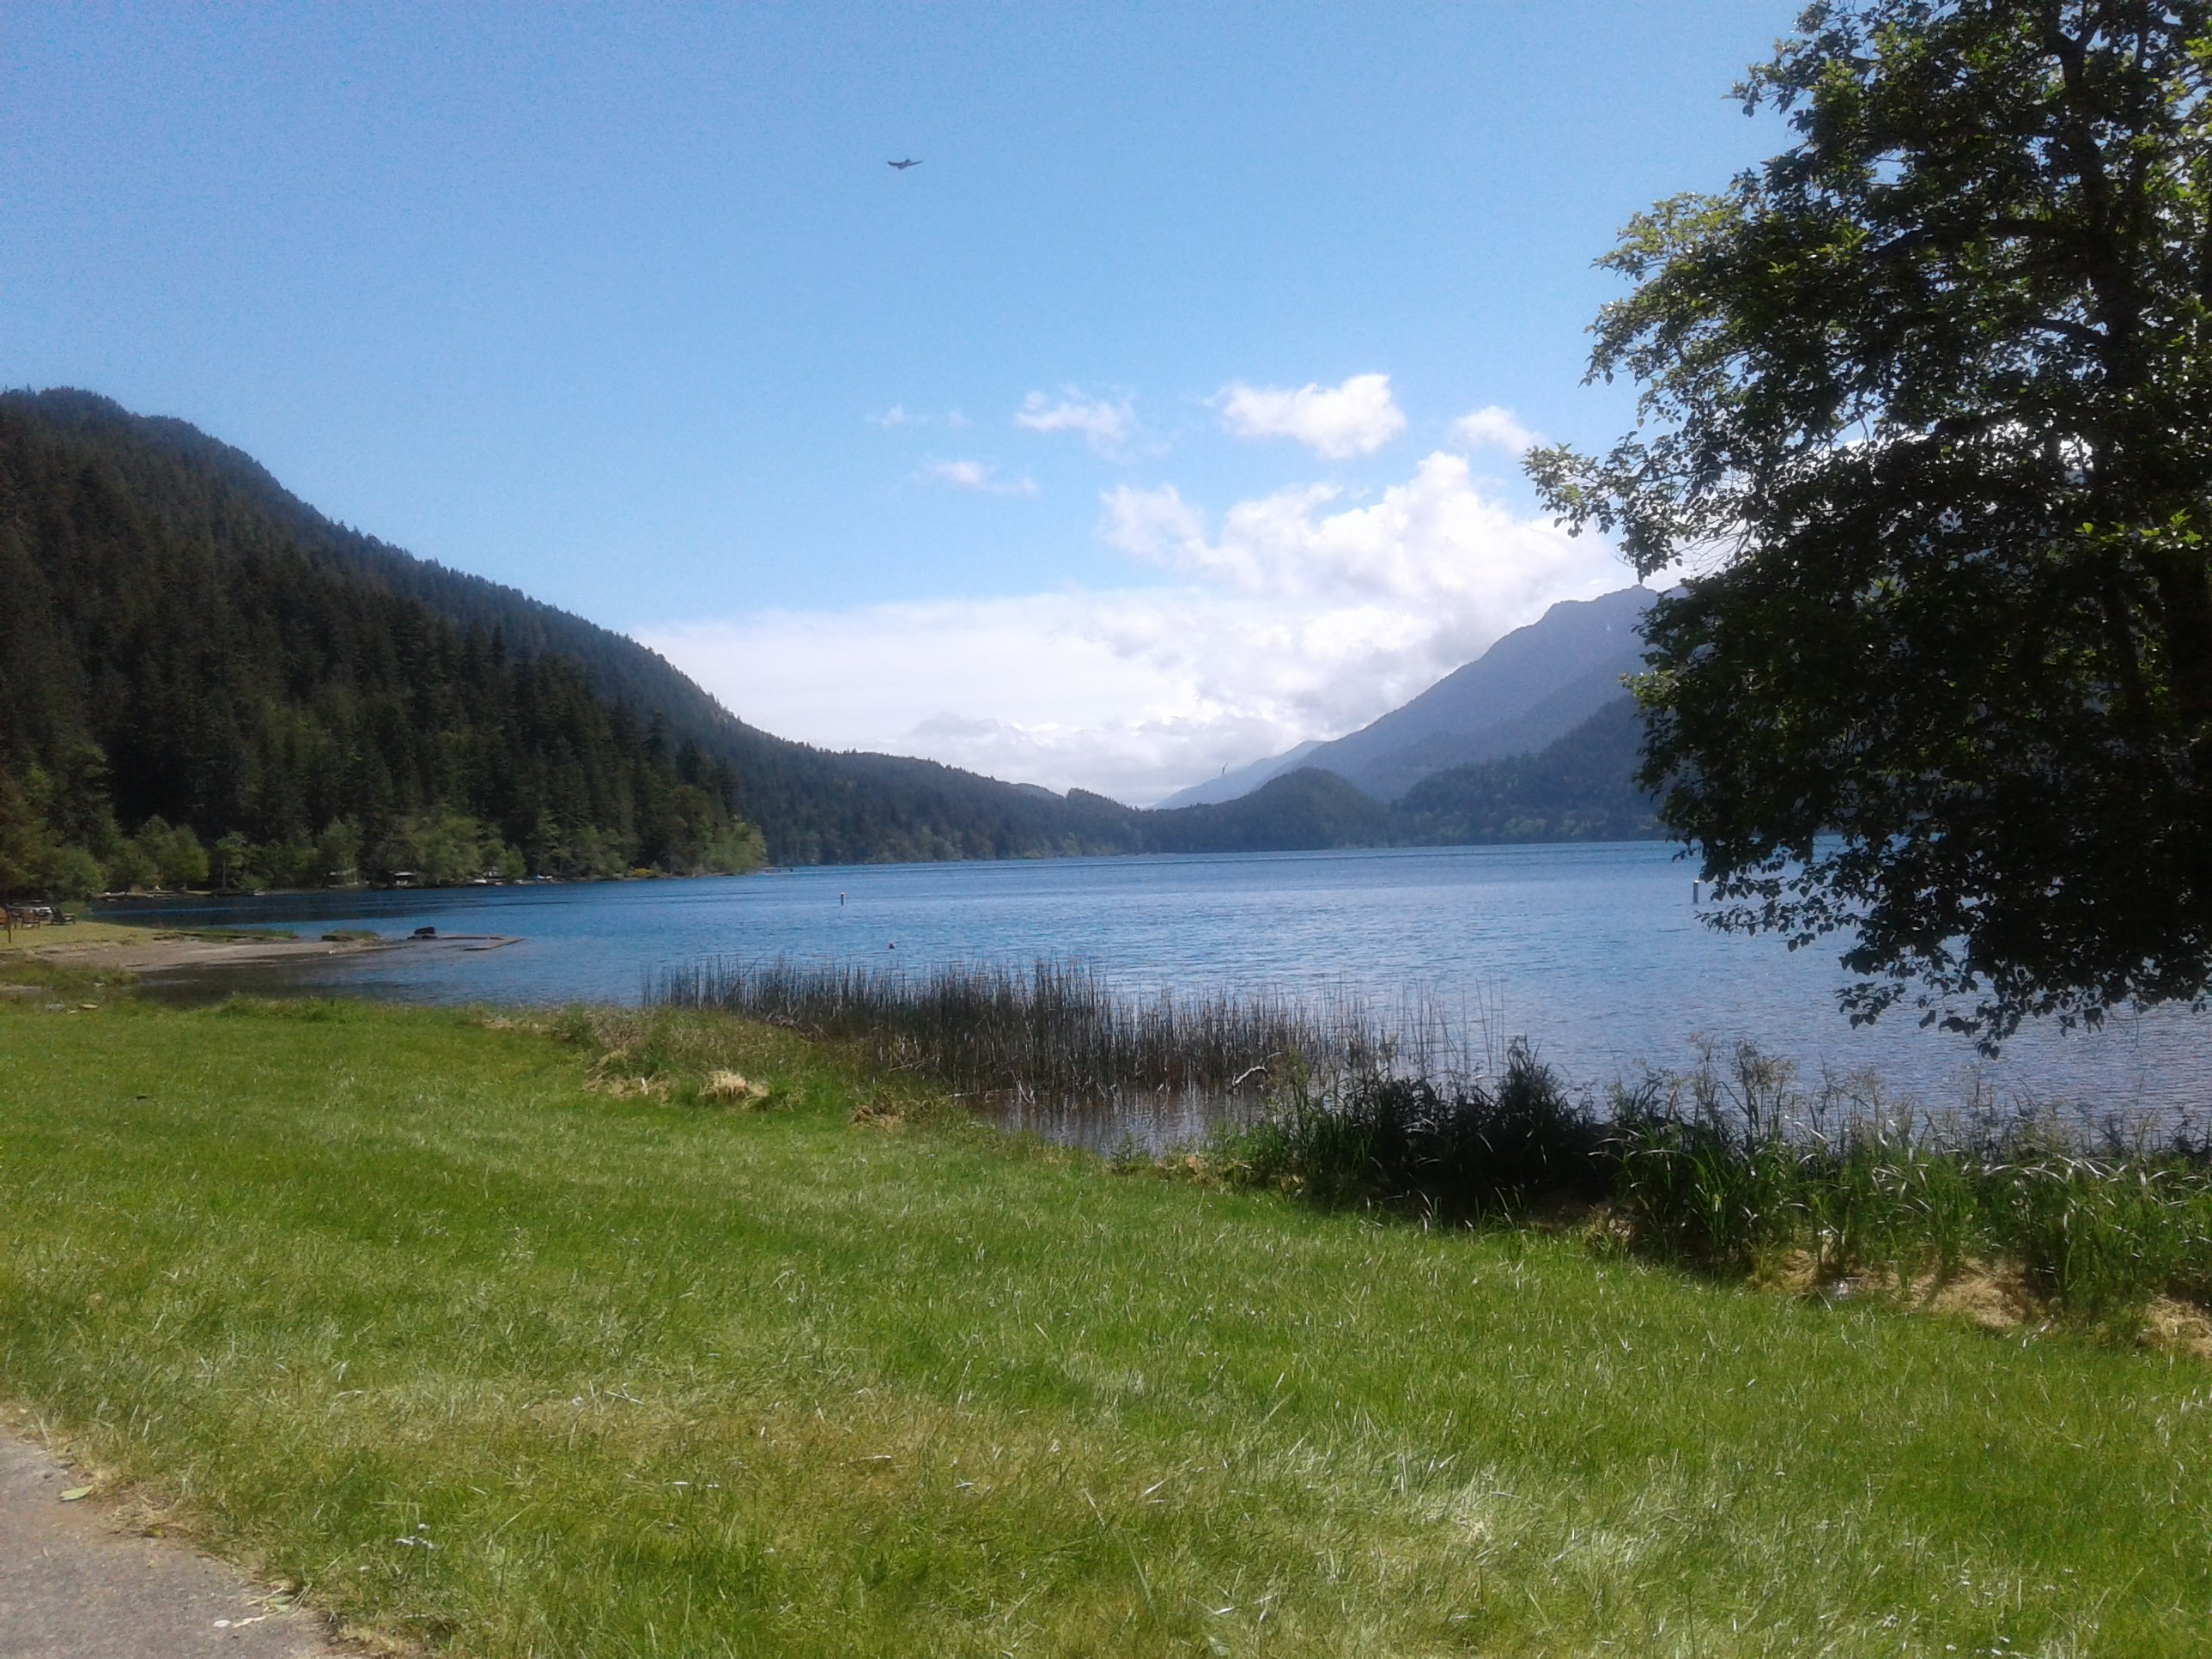 Days Five and Six: Lake Crescent to Victoria, BC